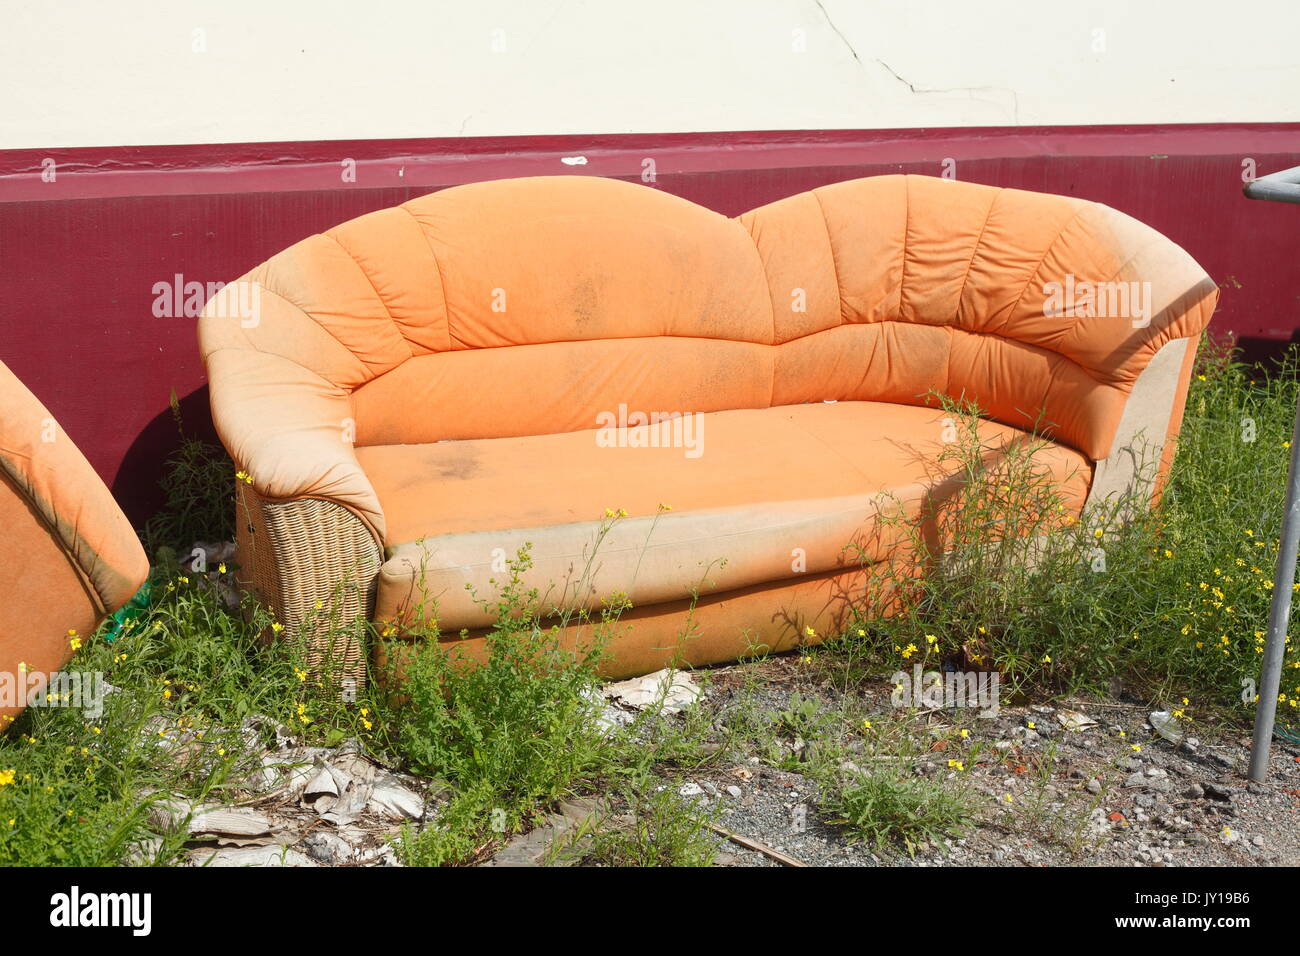 old orange couch for bulky refuse collection Stock Photo